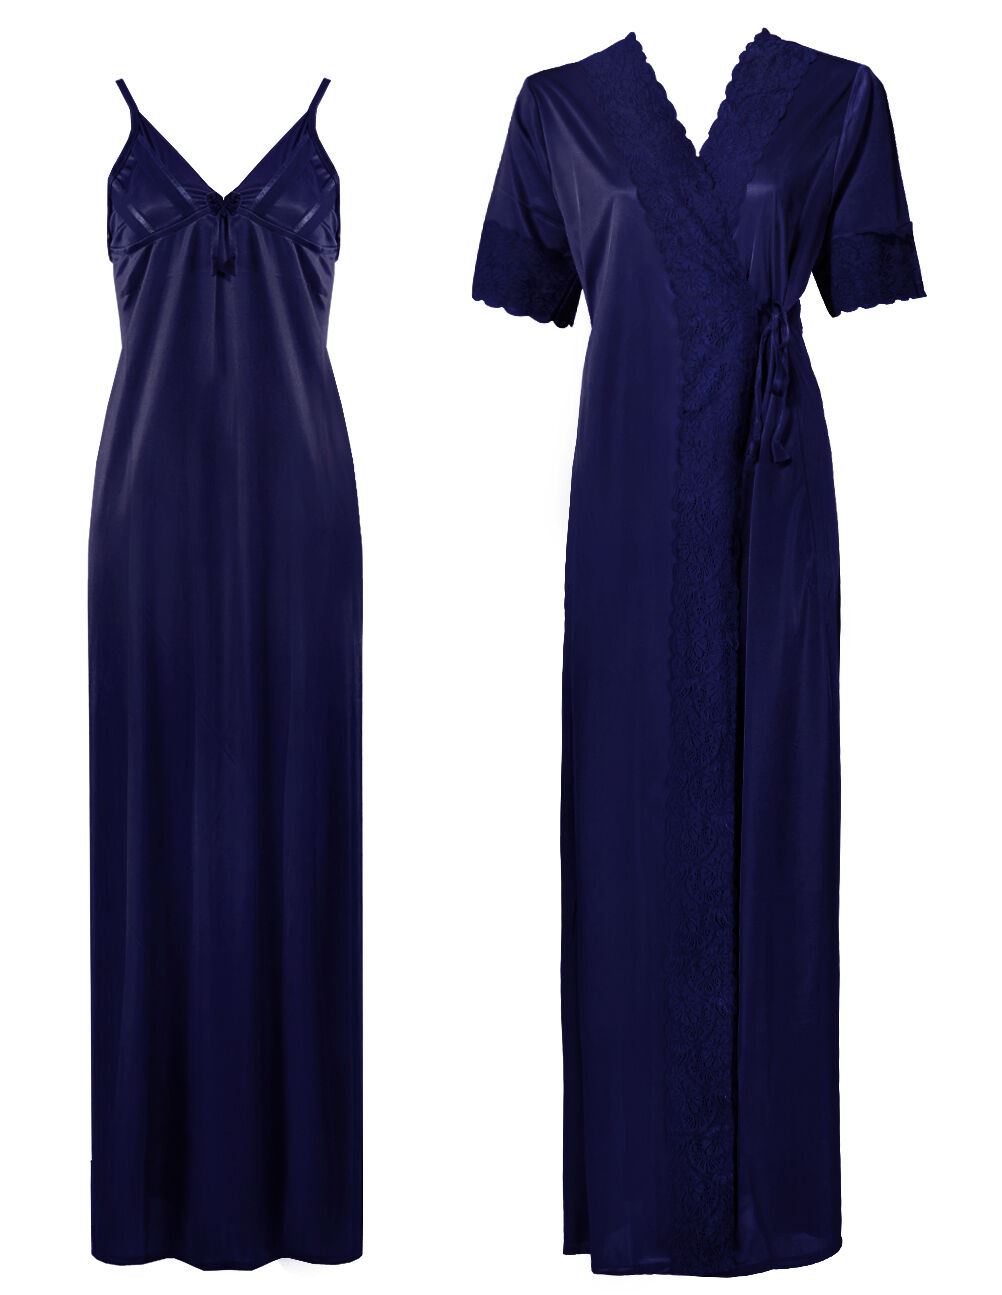 Navy / One Size: Regular Satin Long Strappy Nighty and Robe 2 Pcs Set The Orange Tags